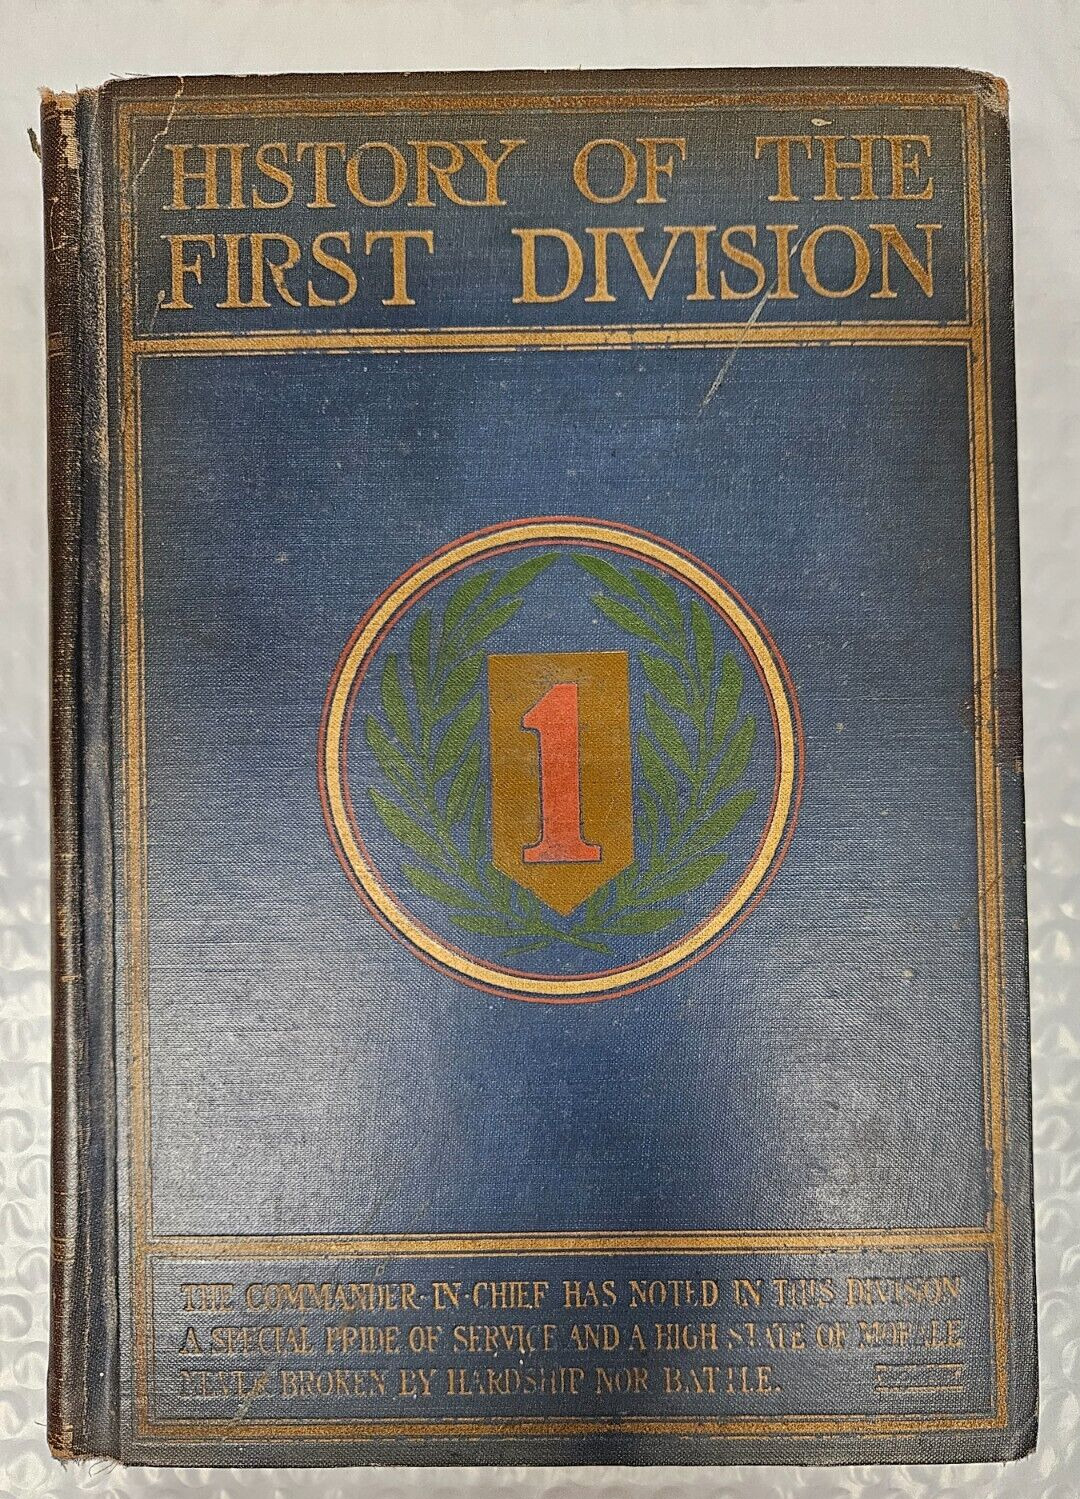 Rare WWI Book - History of the First Division - Published 1931